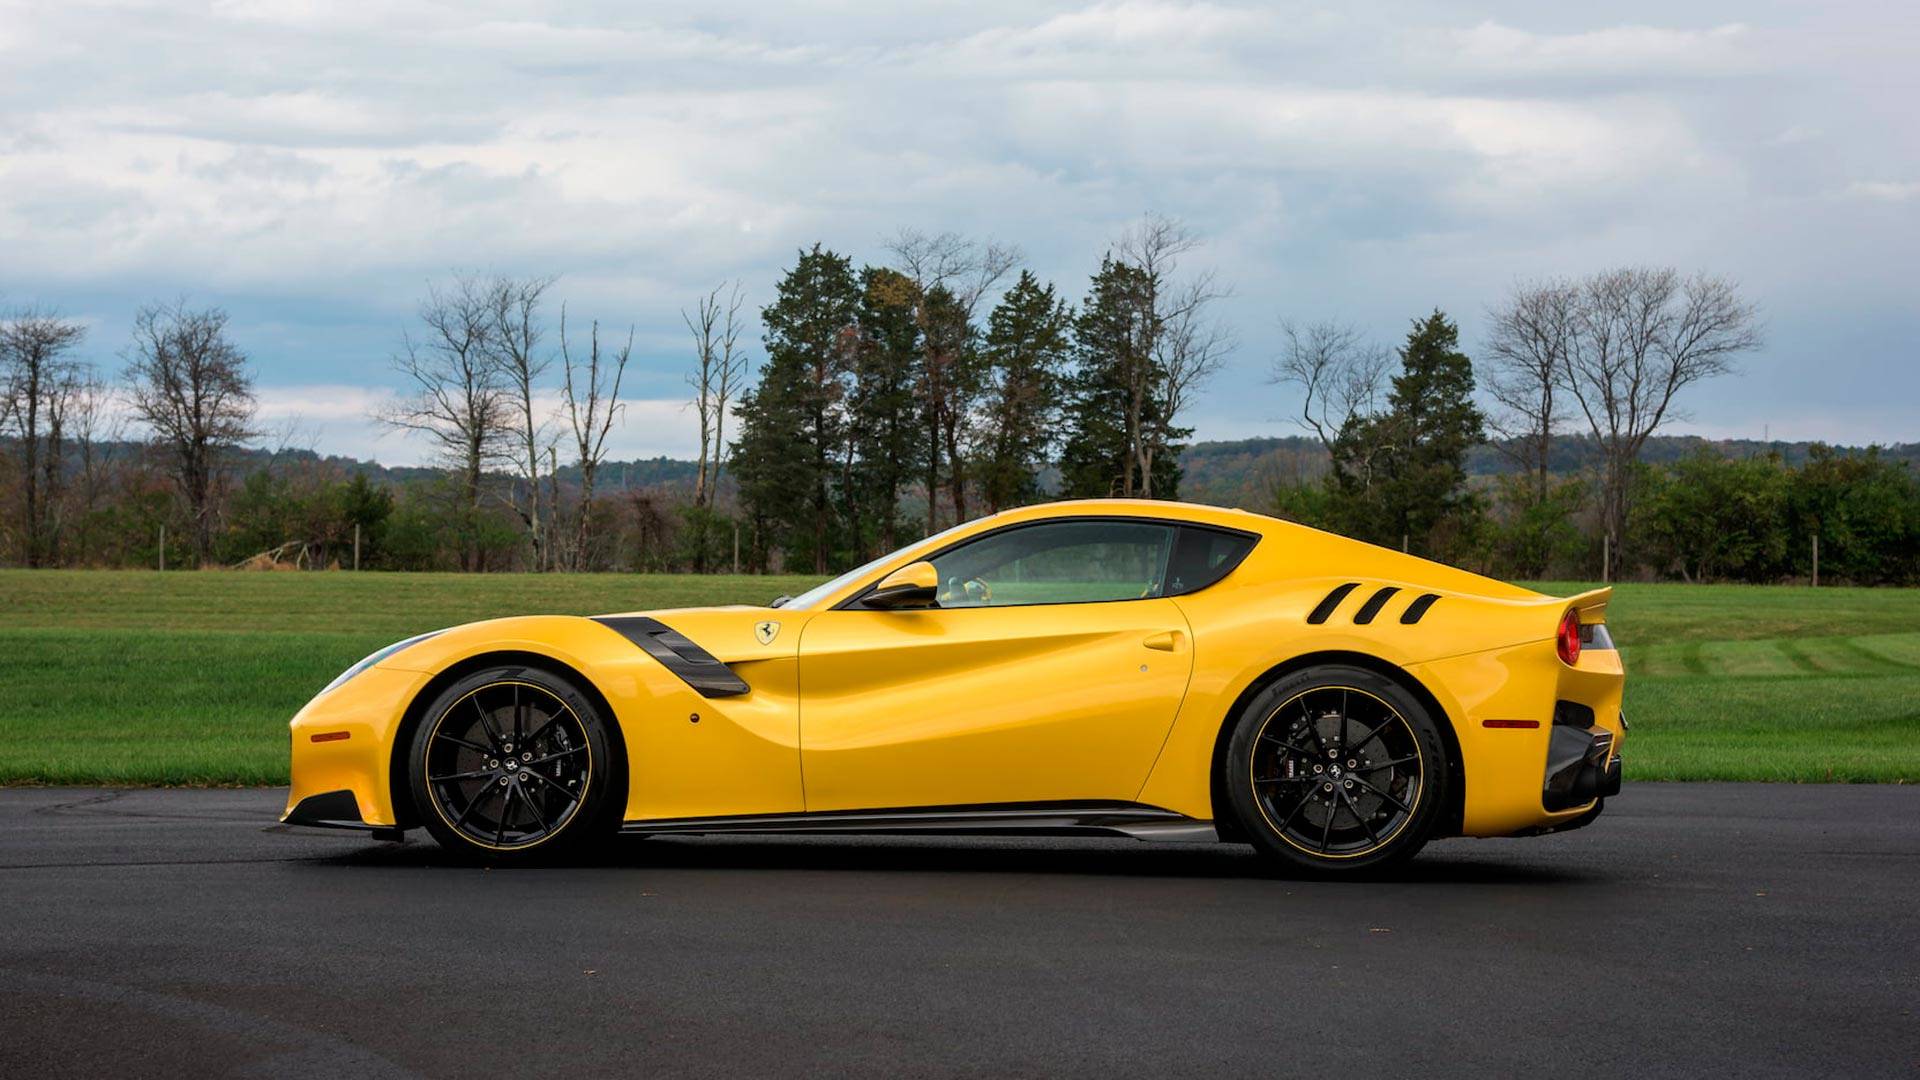 Ferrari F12TdF With $130K In Options Could Bring $1.3M